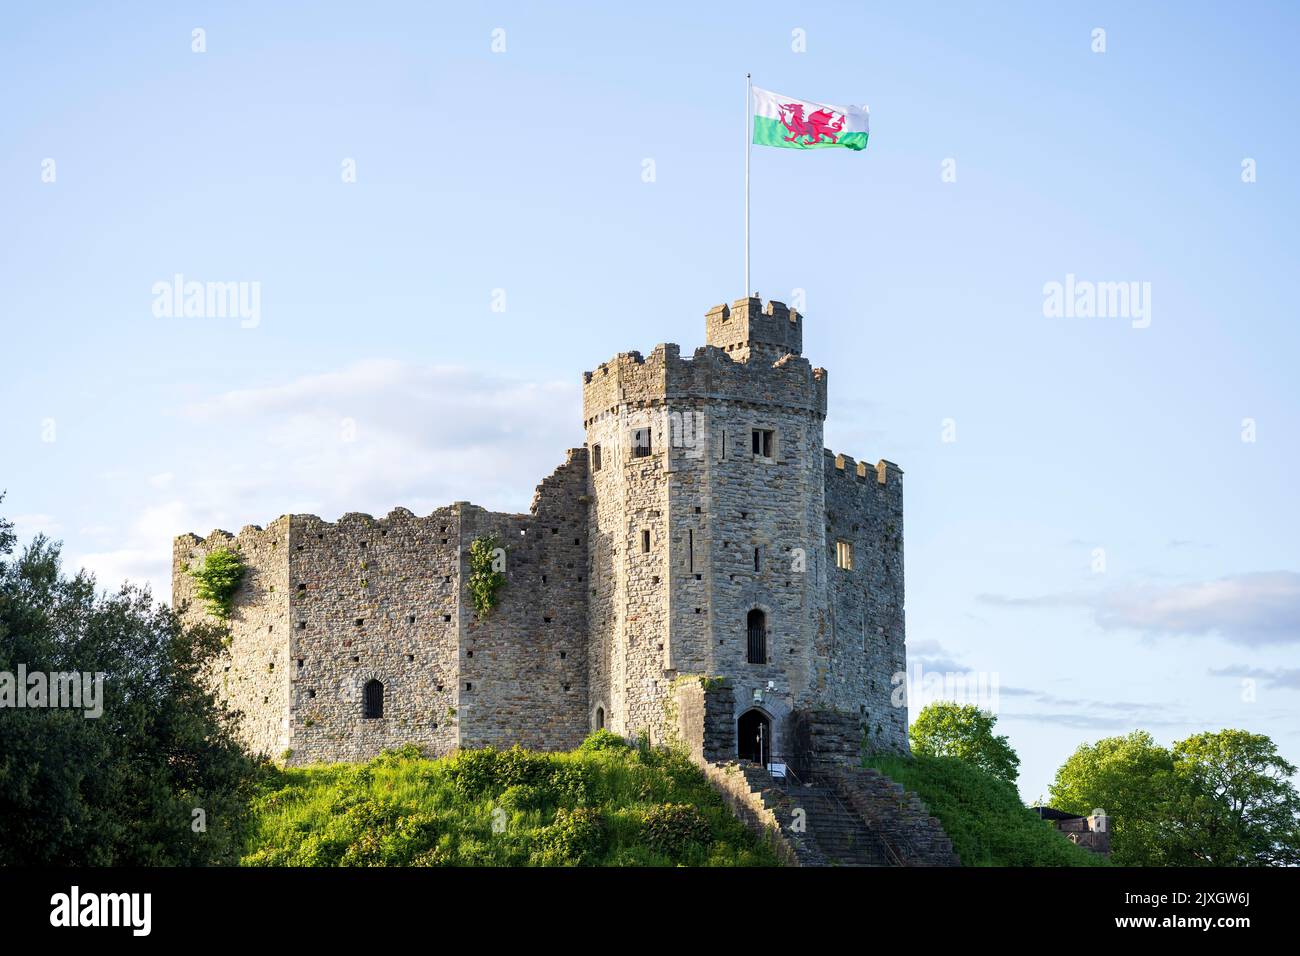 Cardiff Castle on a clear day with a blue sky and Wales flag flying in Cardiff, United Kingdom. Stock Photo